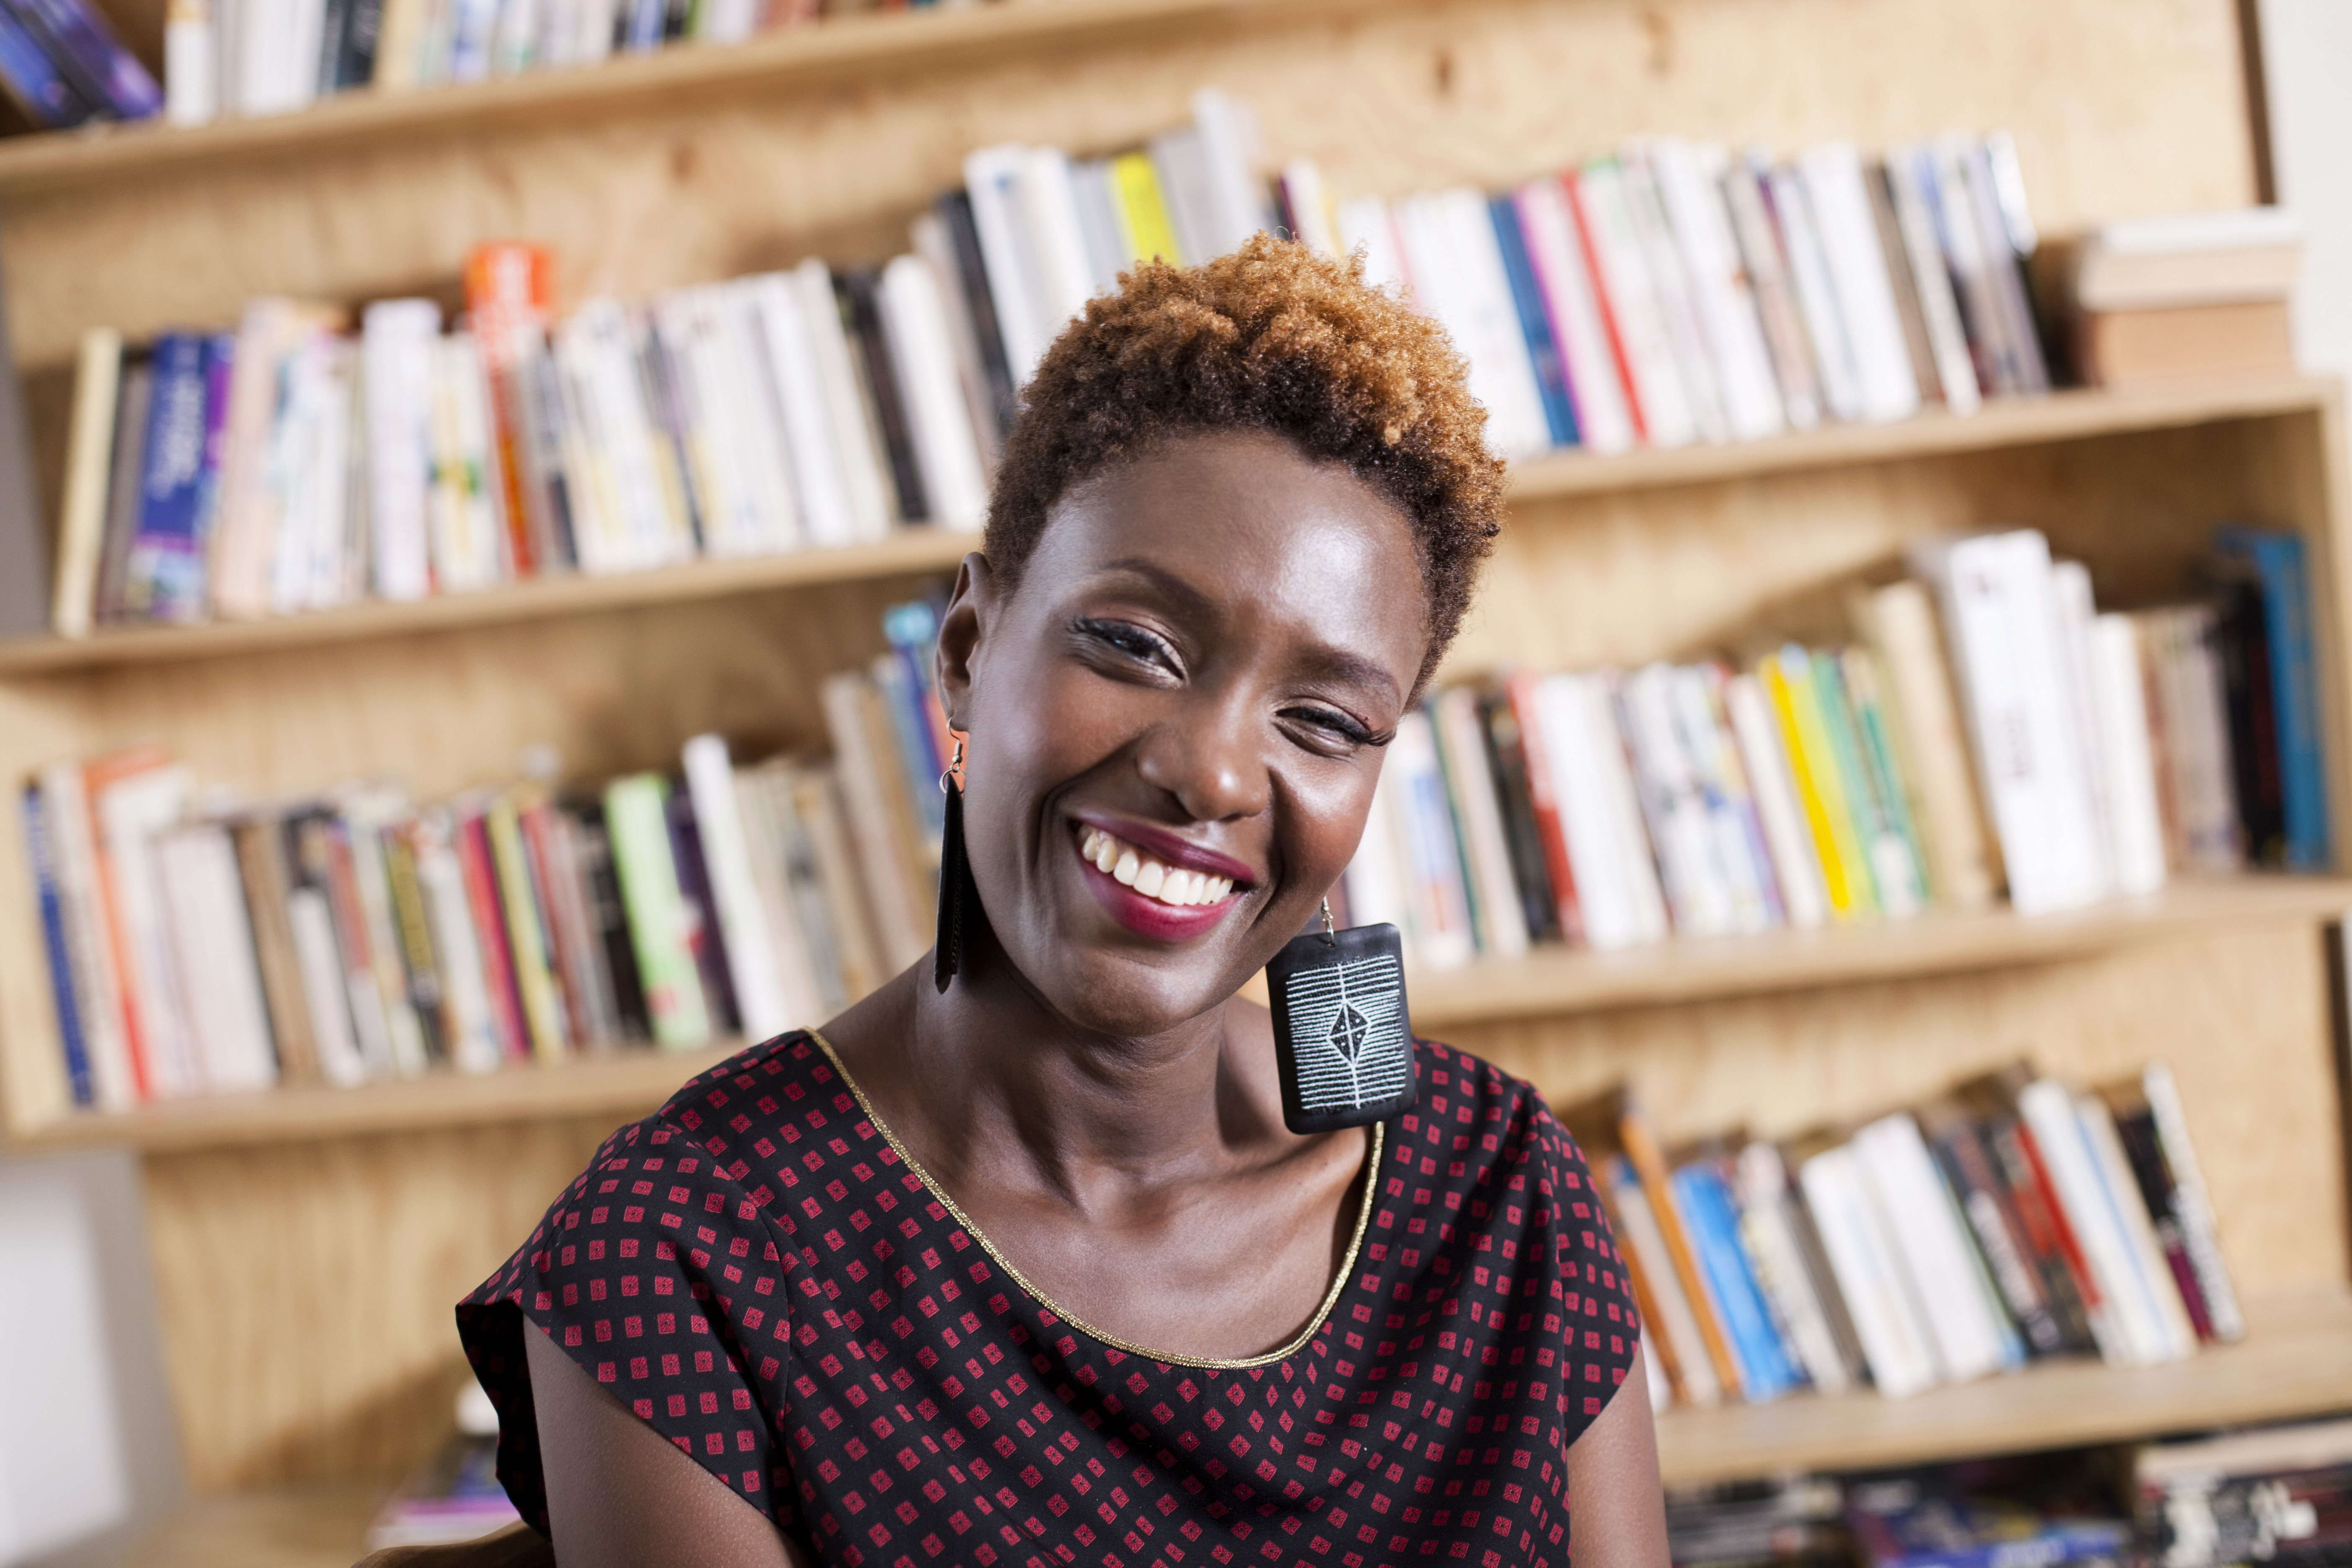 A Black woman with short hair wears earrings and a black and red blouse and smiles warmly in front of a large bookshelf.